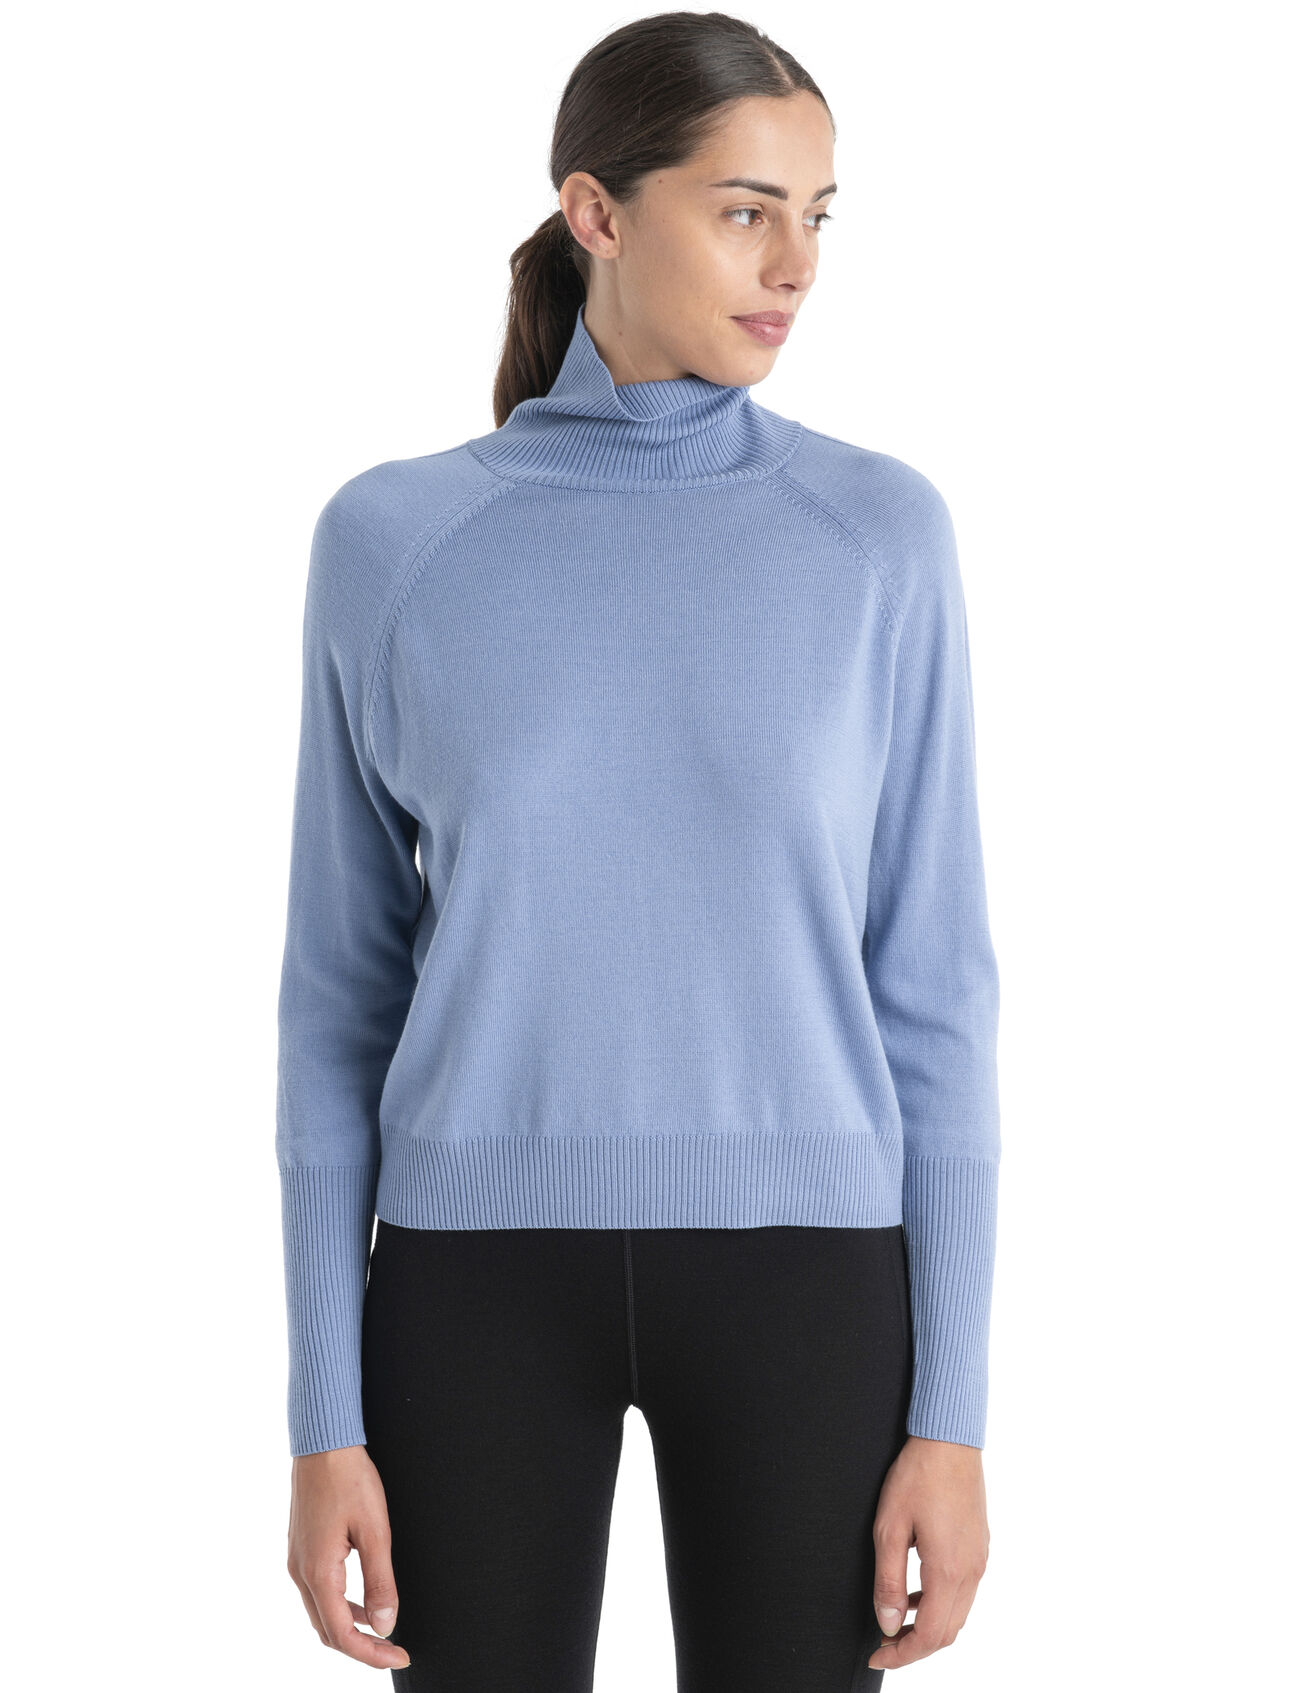 Womens MerinoFine™ Luxe Long Sleeve High Neck Sweater A premium everyday sweater made with ultra-soft, fine-gauge merino wool fibres, the MerinoFine™ Luxe Long Sleeve High Neck Sweater helps regulate body temperature with classy yet comfortable style.